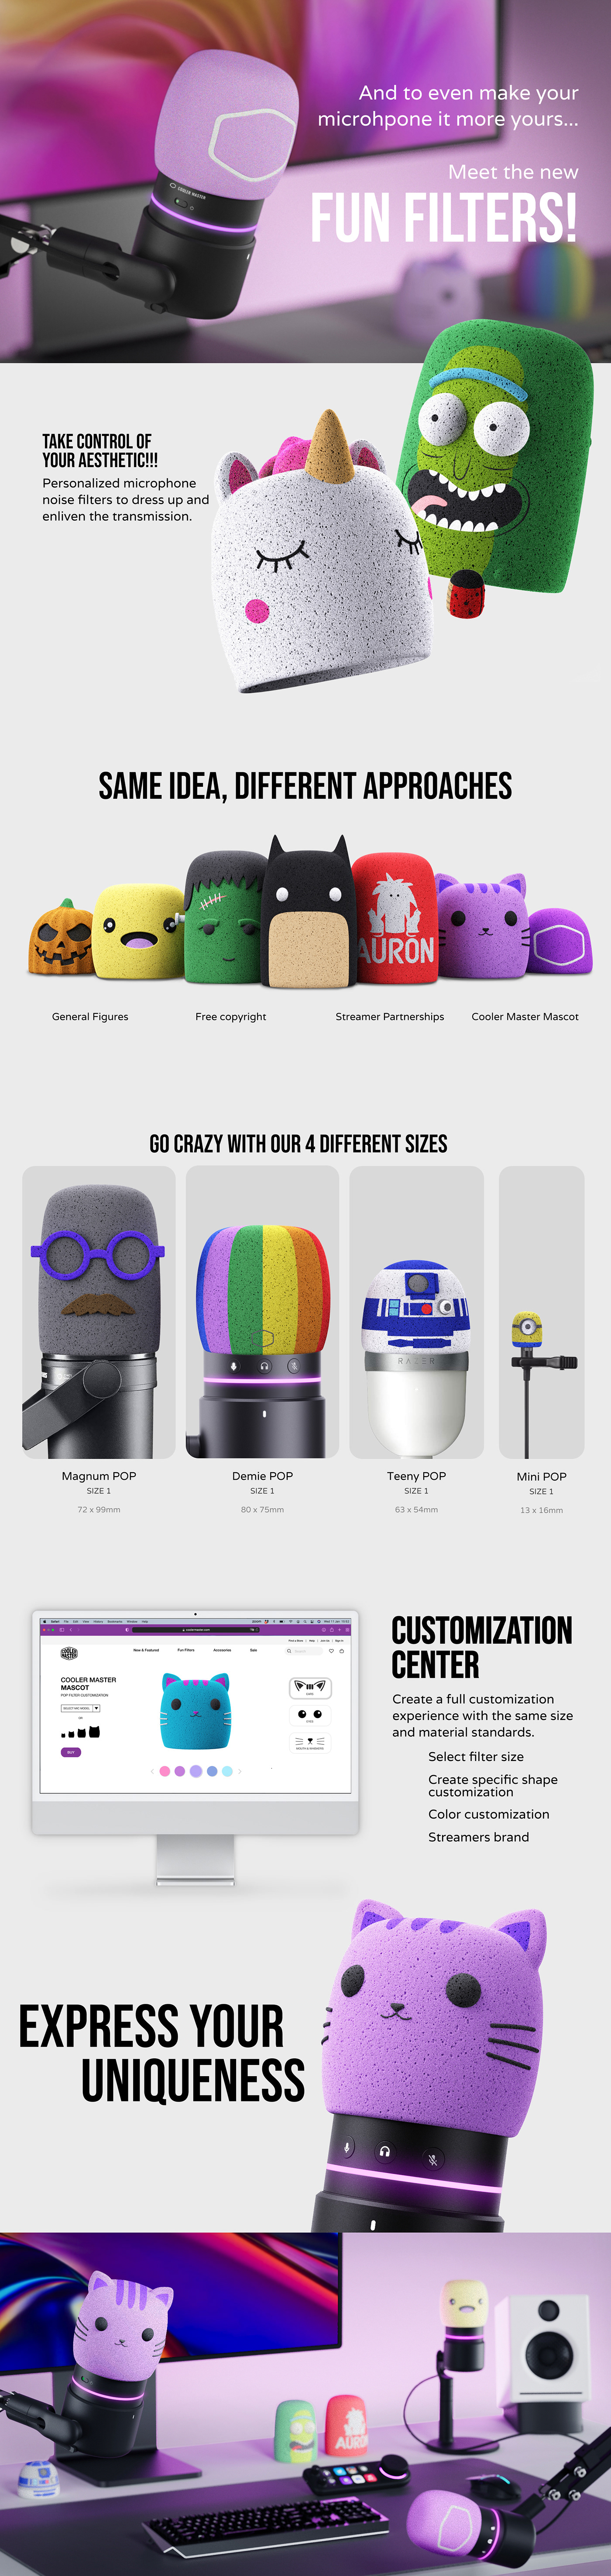 Streaming coolermaster Gaming product design  productdesigner industrial design  industrialdesigner microphone IndustrialDesignPortfolio microphonedesign